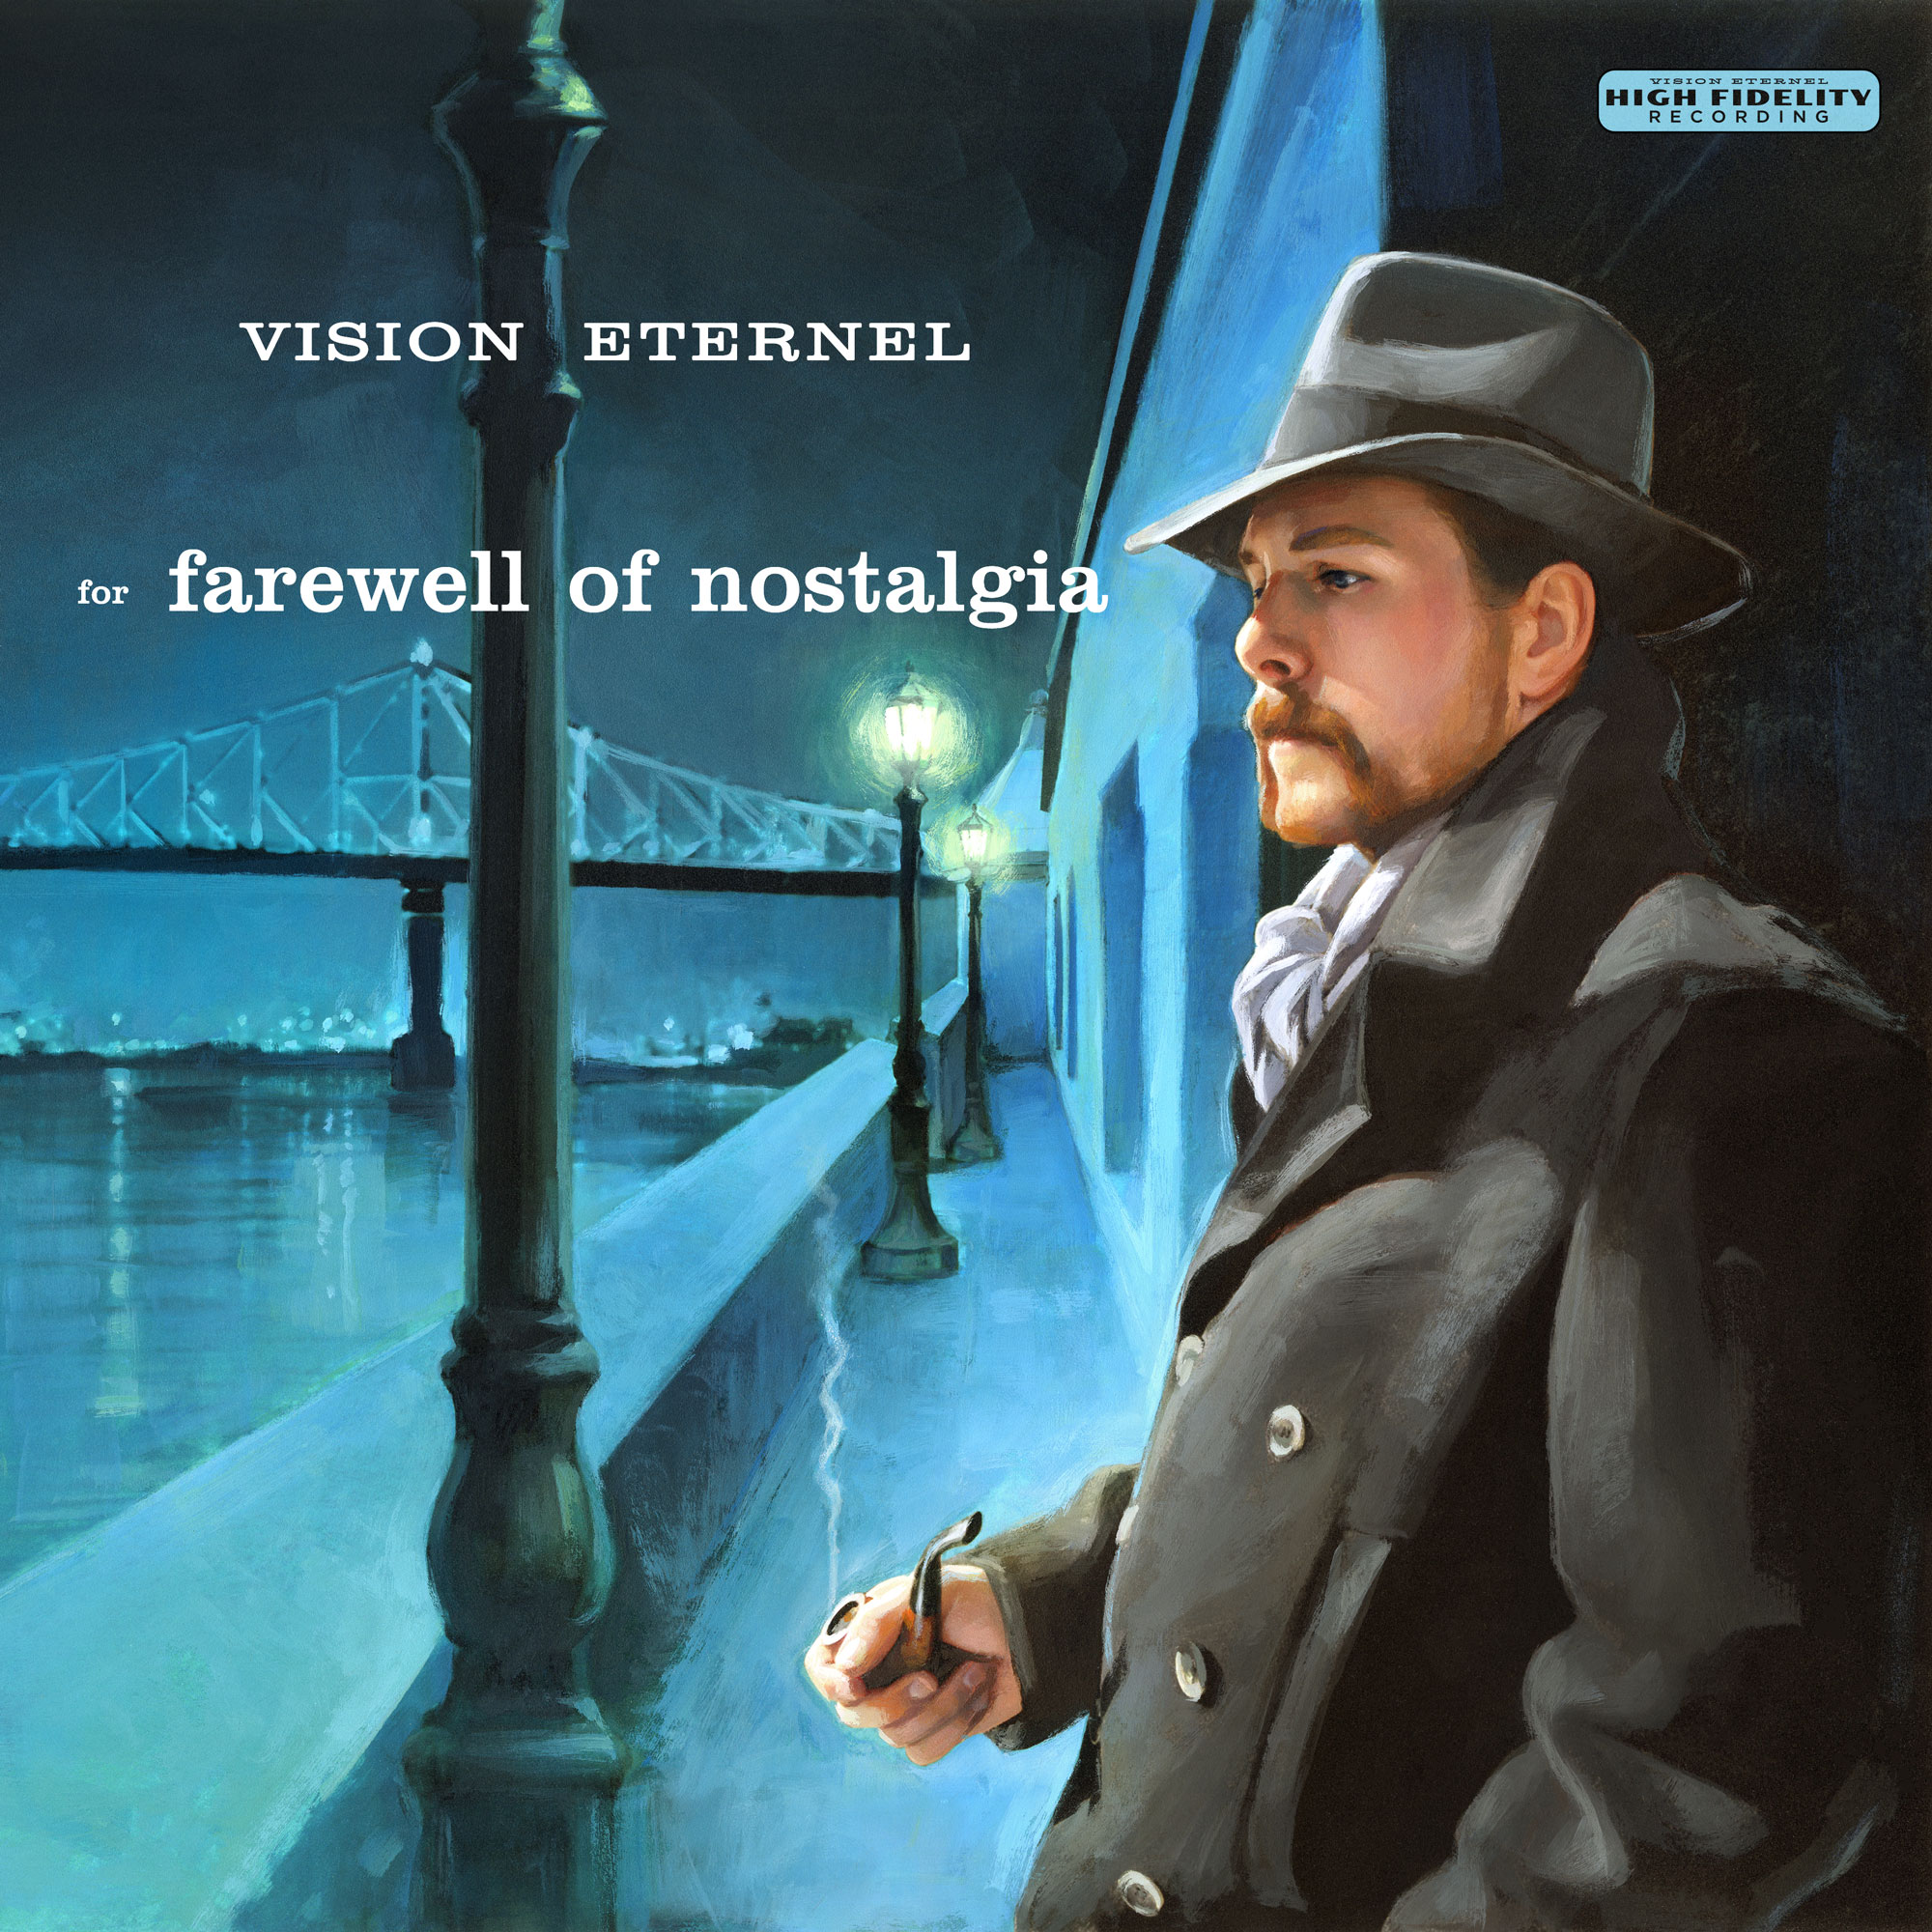 For Farewell Of Nostalgia by Vision Eternel